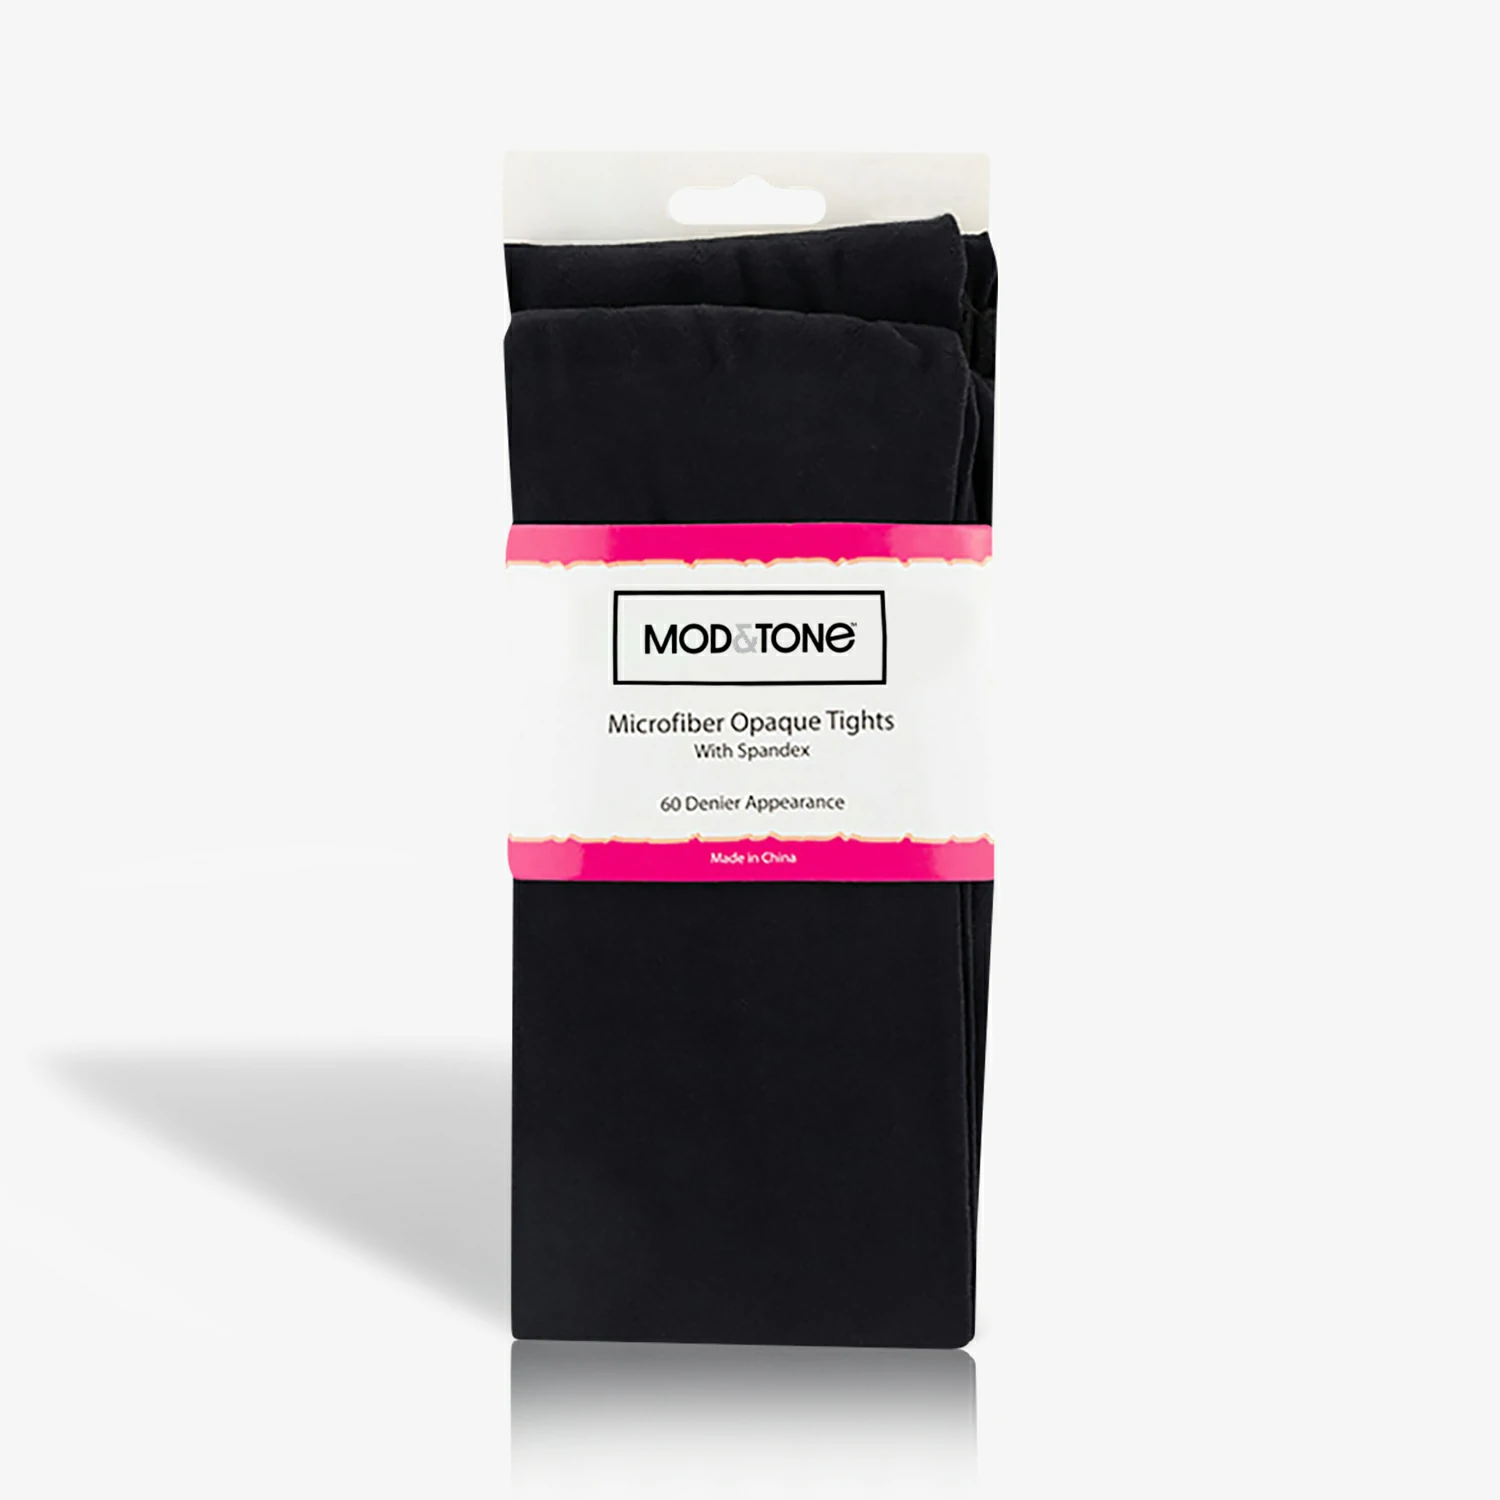 A package of Mod&Tone 2 Pack Girls Microfiber Opaque Tights 60 denier with a pink label.